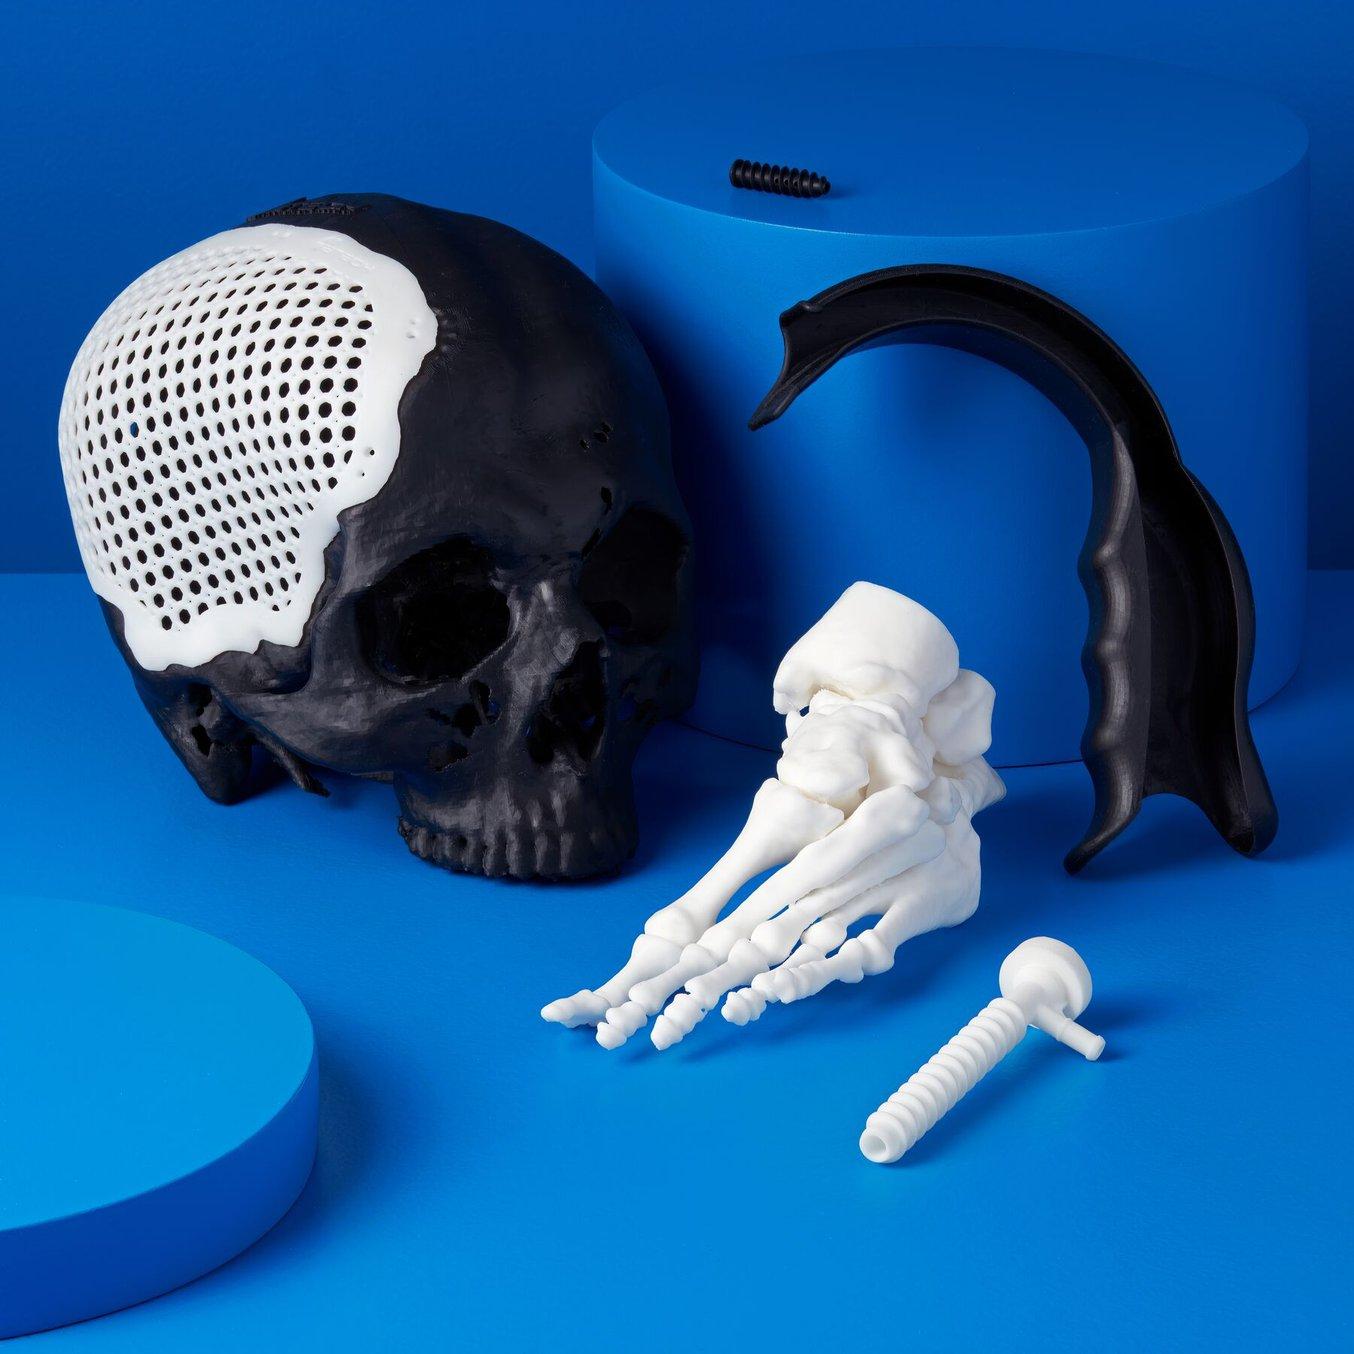 Black and white 3D printed skull and other parts